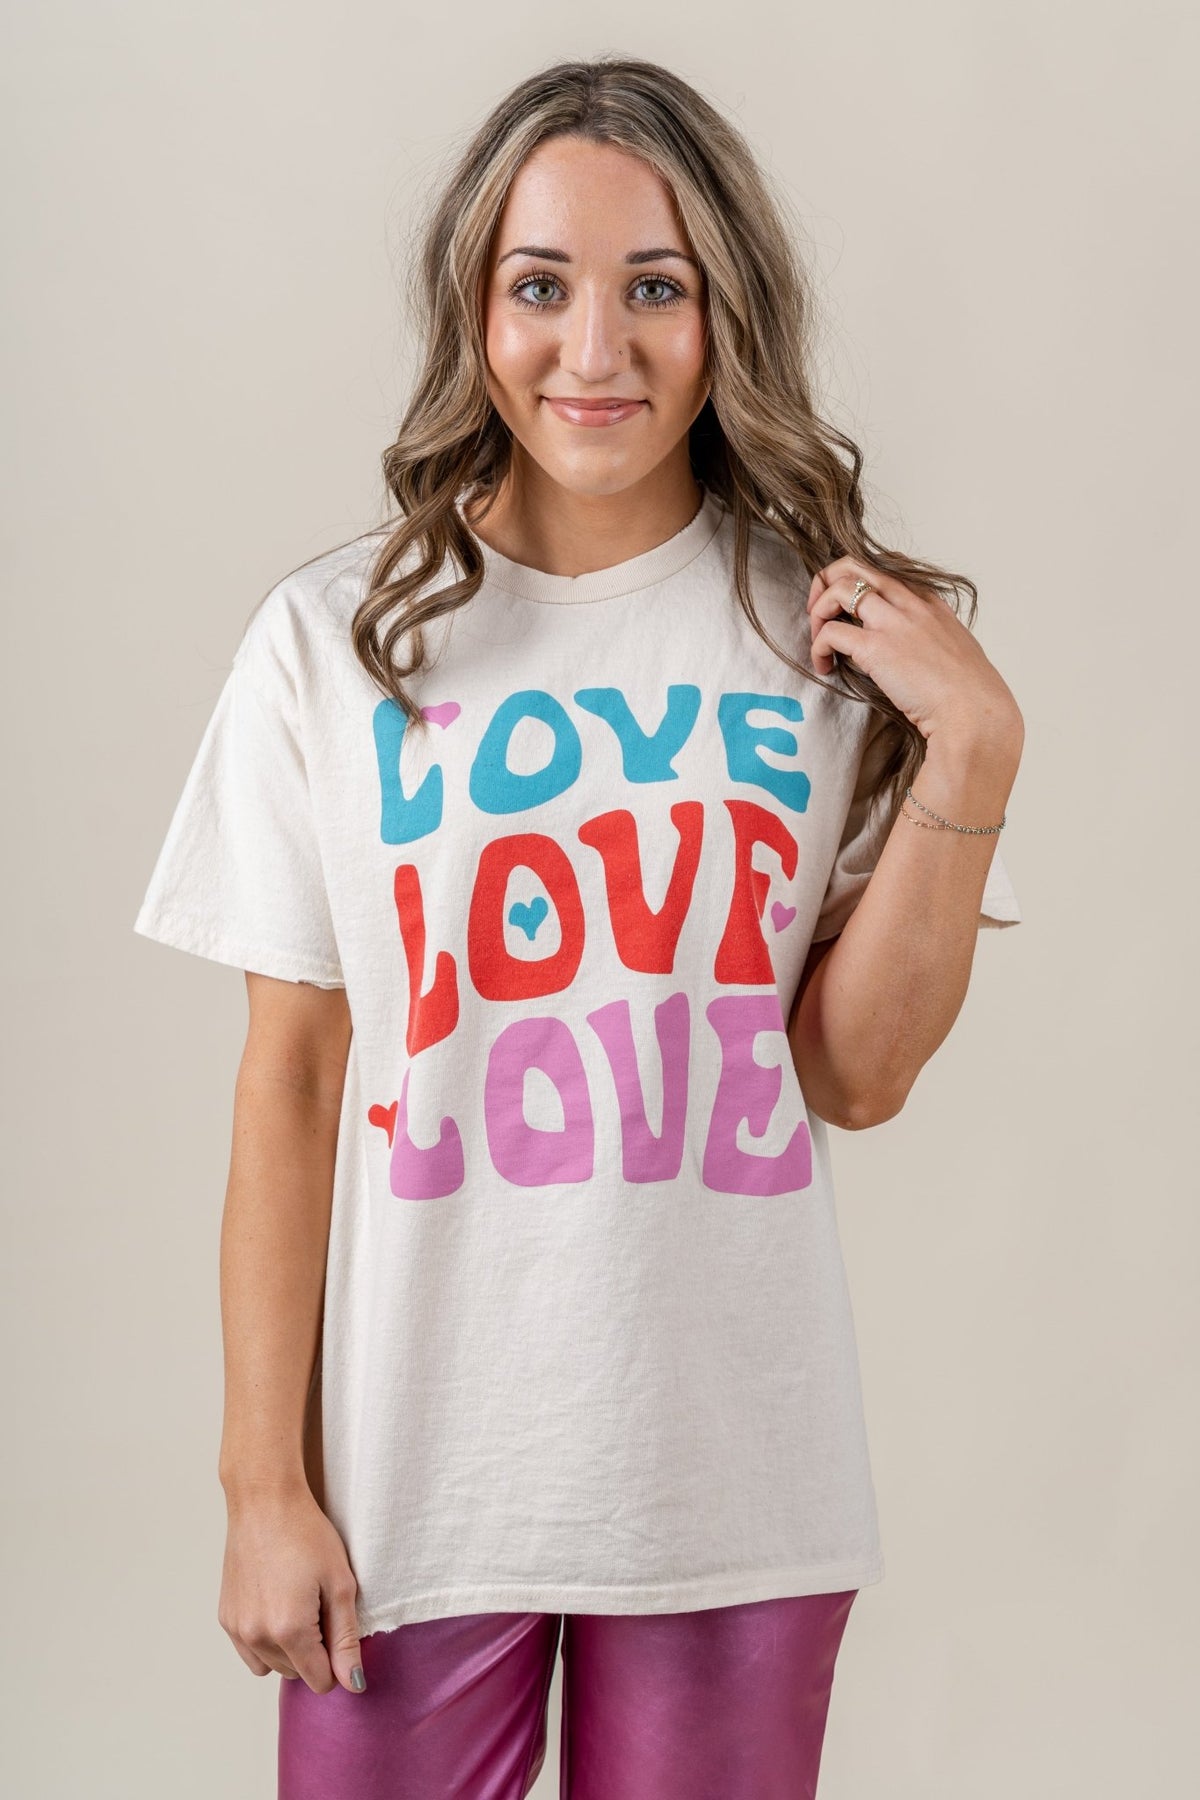 Love repeat thrifted t-shirt off white - Trendy T-Shirts for Valentine's Day at Lush Fashion Lounge Boutique in Oklahoma City